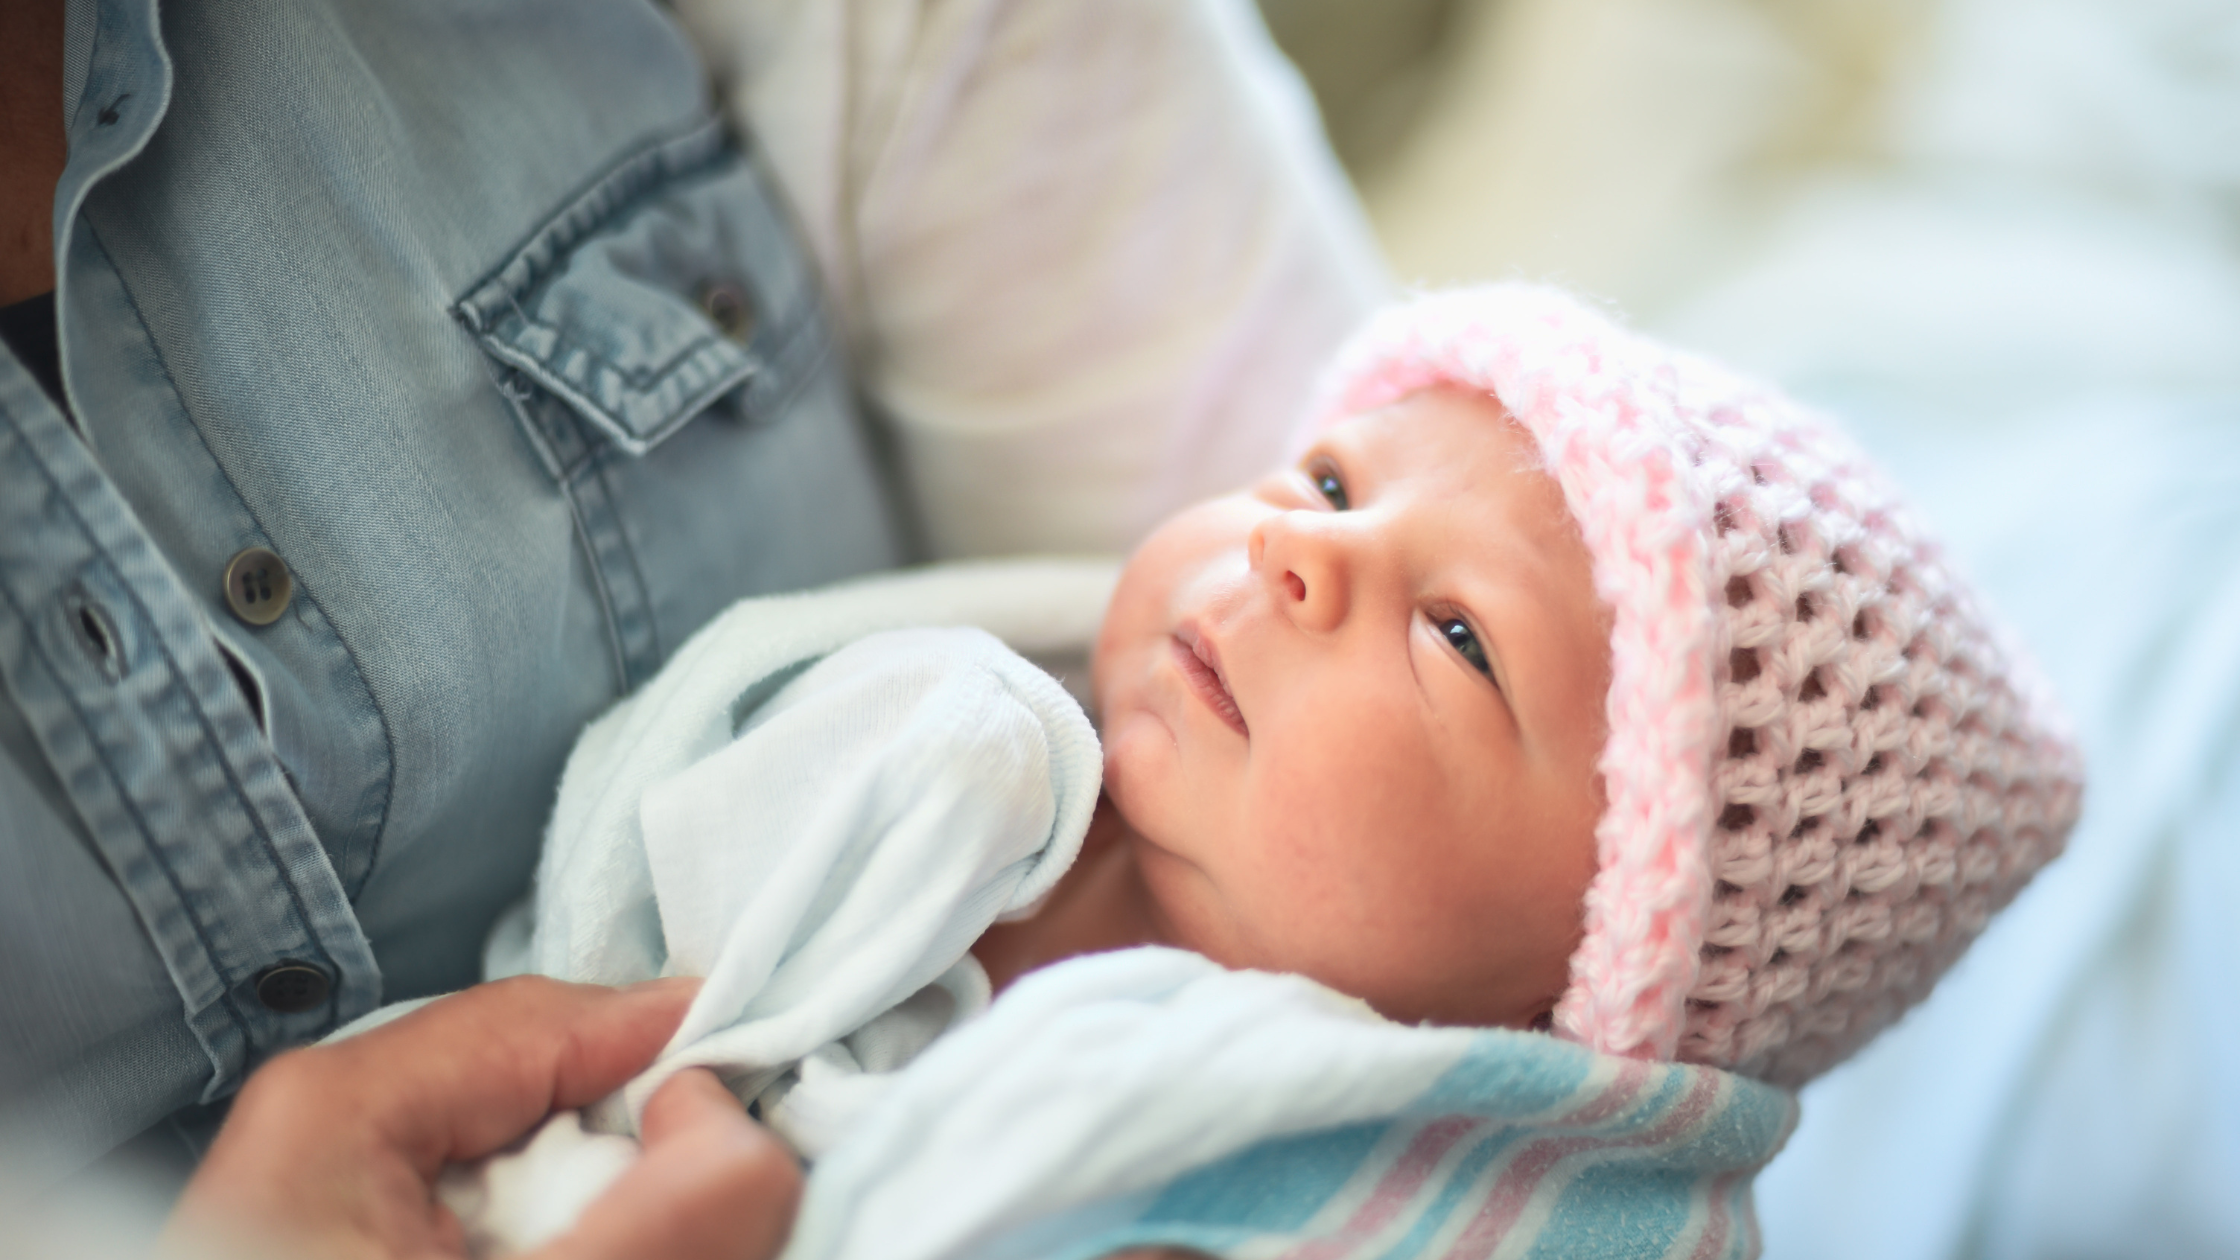 Winter Newborn Care Essential Tips for Keeping Your Baby Warm and Healthy - MHA of WNY Blog Feaured IMG